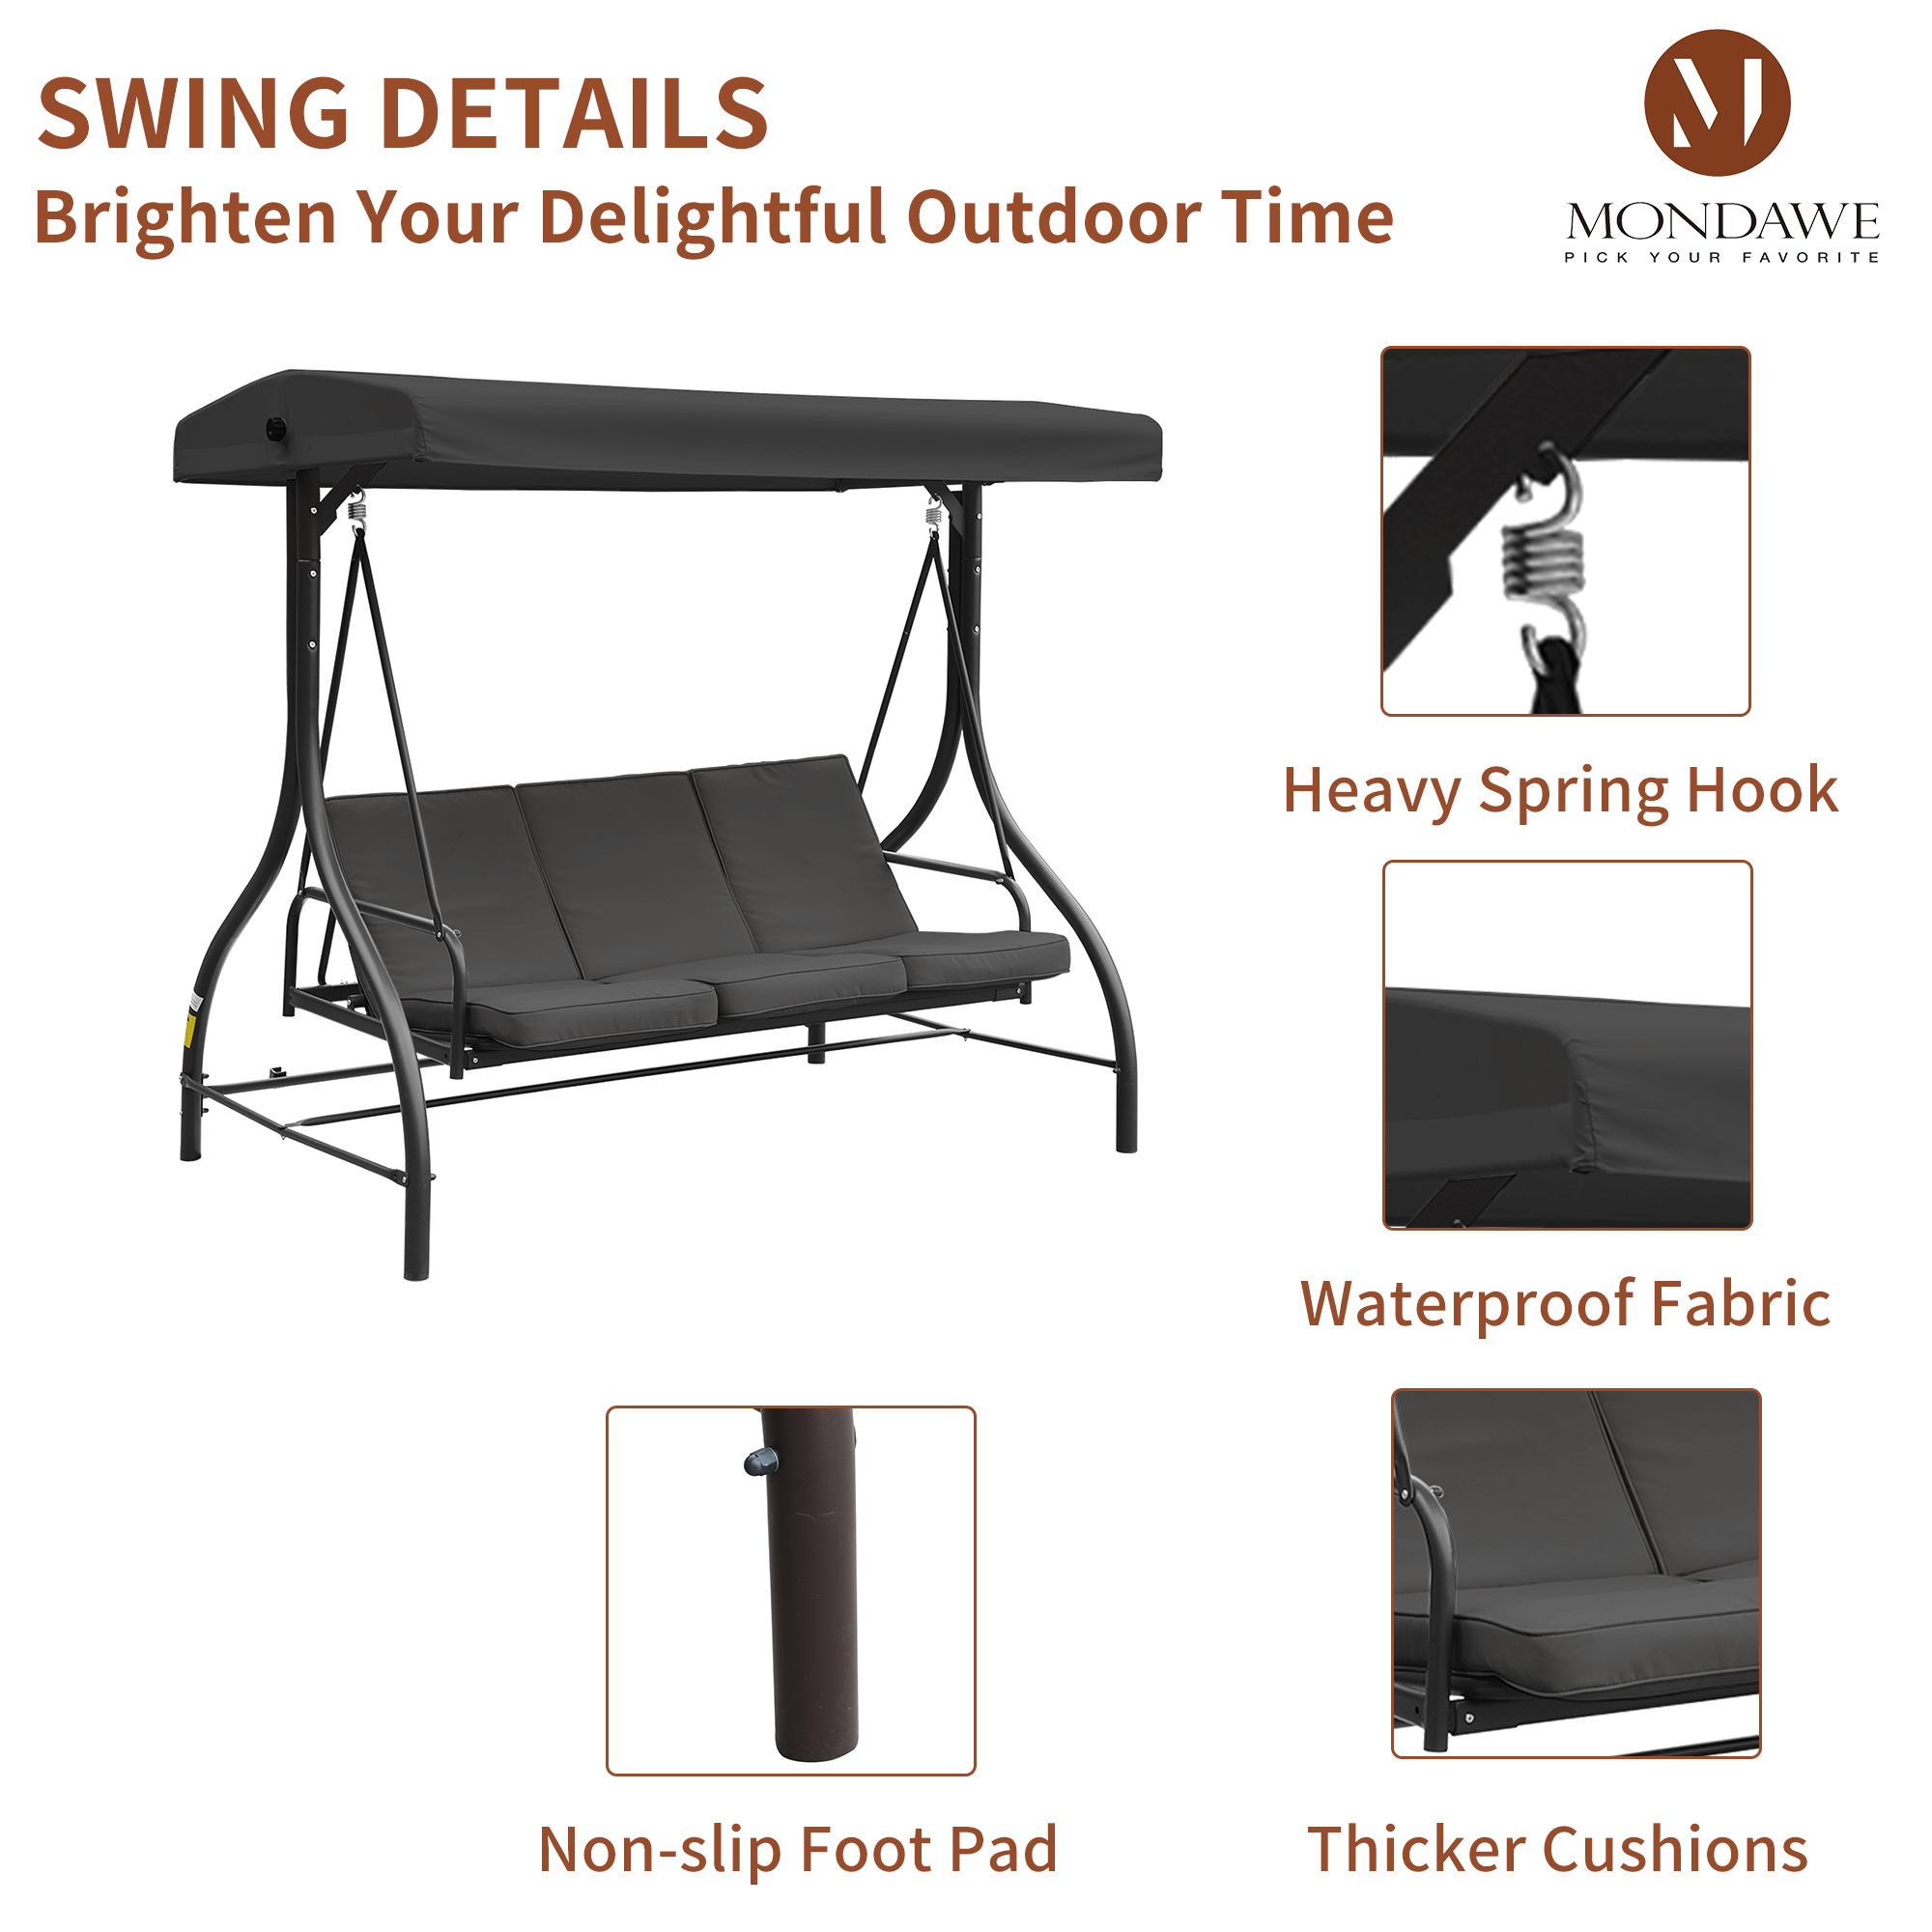 Mondawe 3-Seat Steel Outdoor Porch Swing Chair with Adjustable Canopy and Removable Cushions -Mondawe